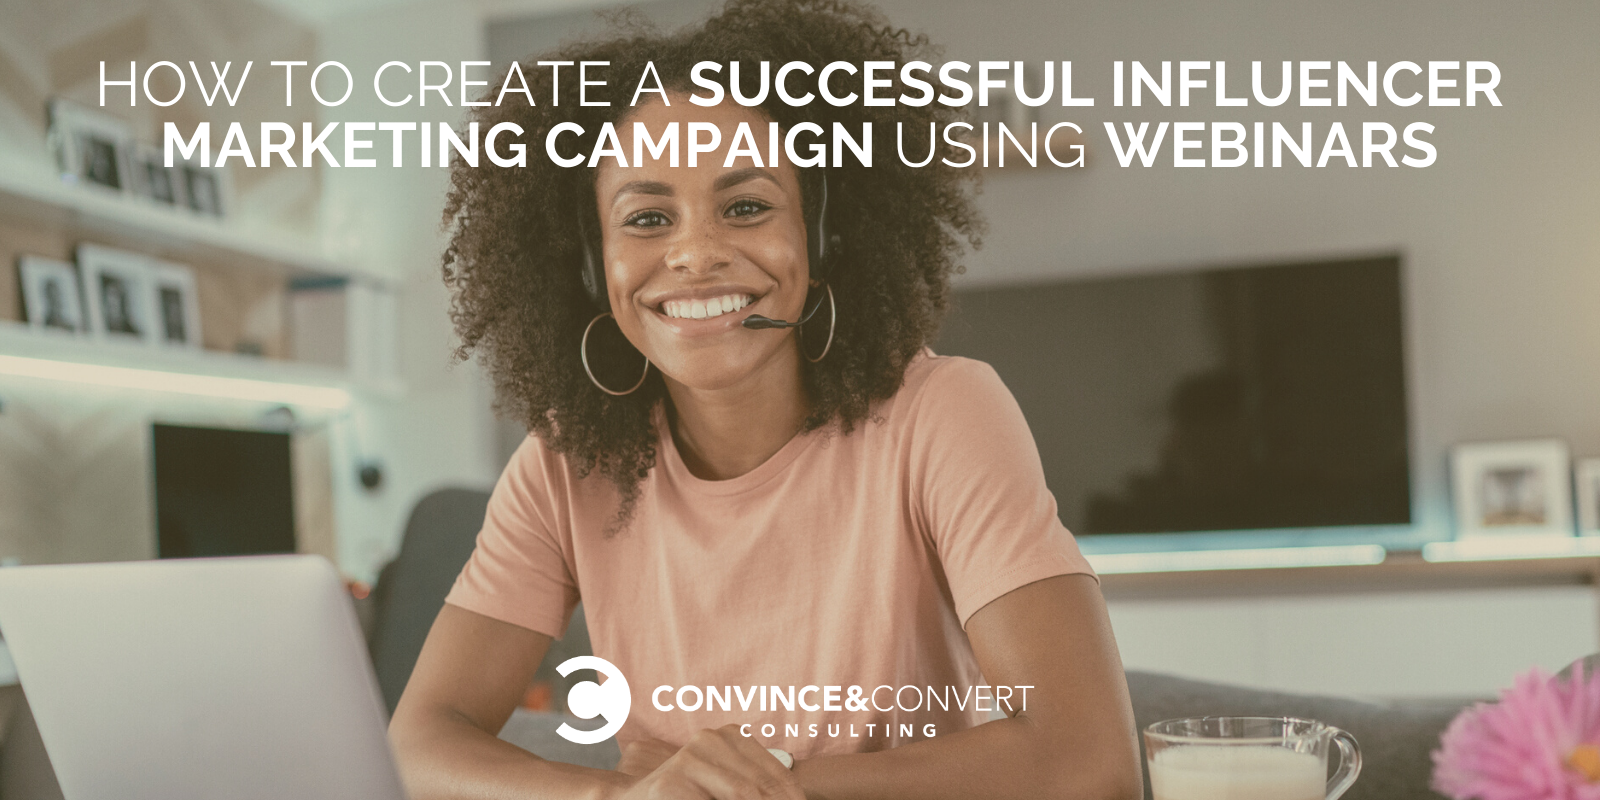 How to Create a Successful Influencer Marketing Campaign Using Webinars